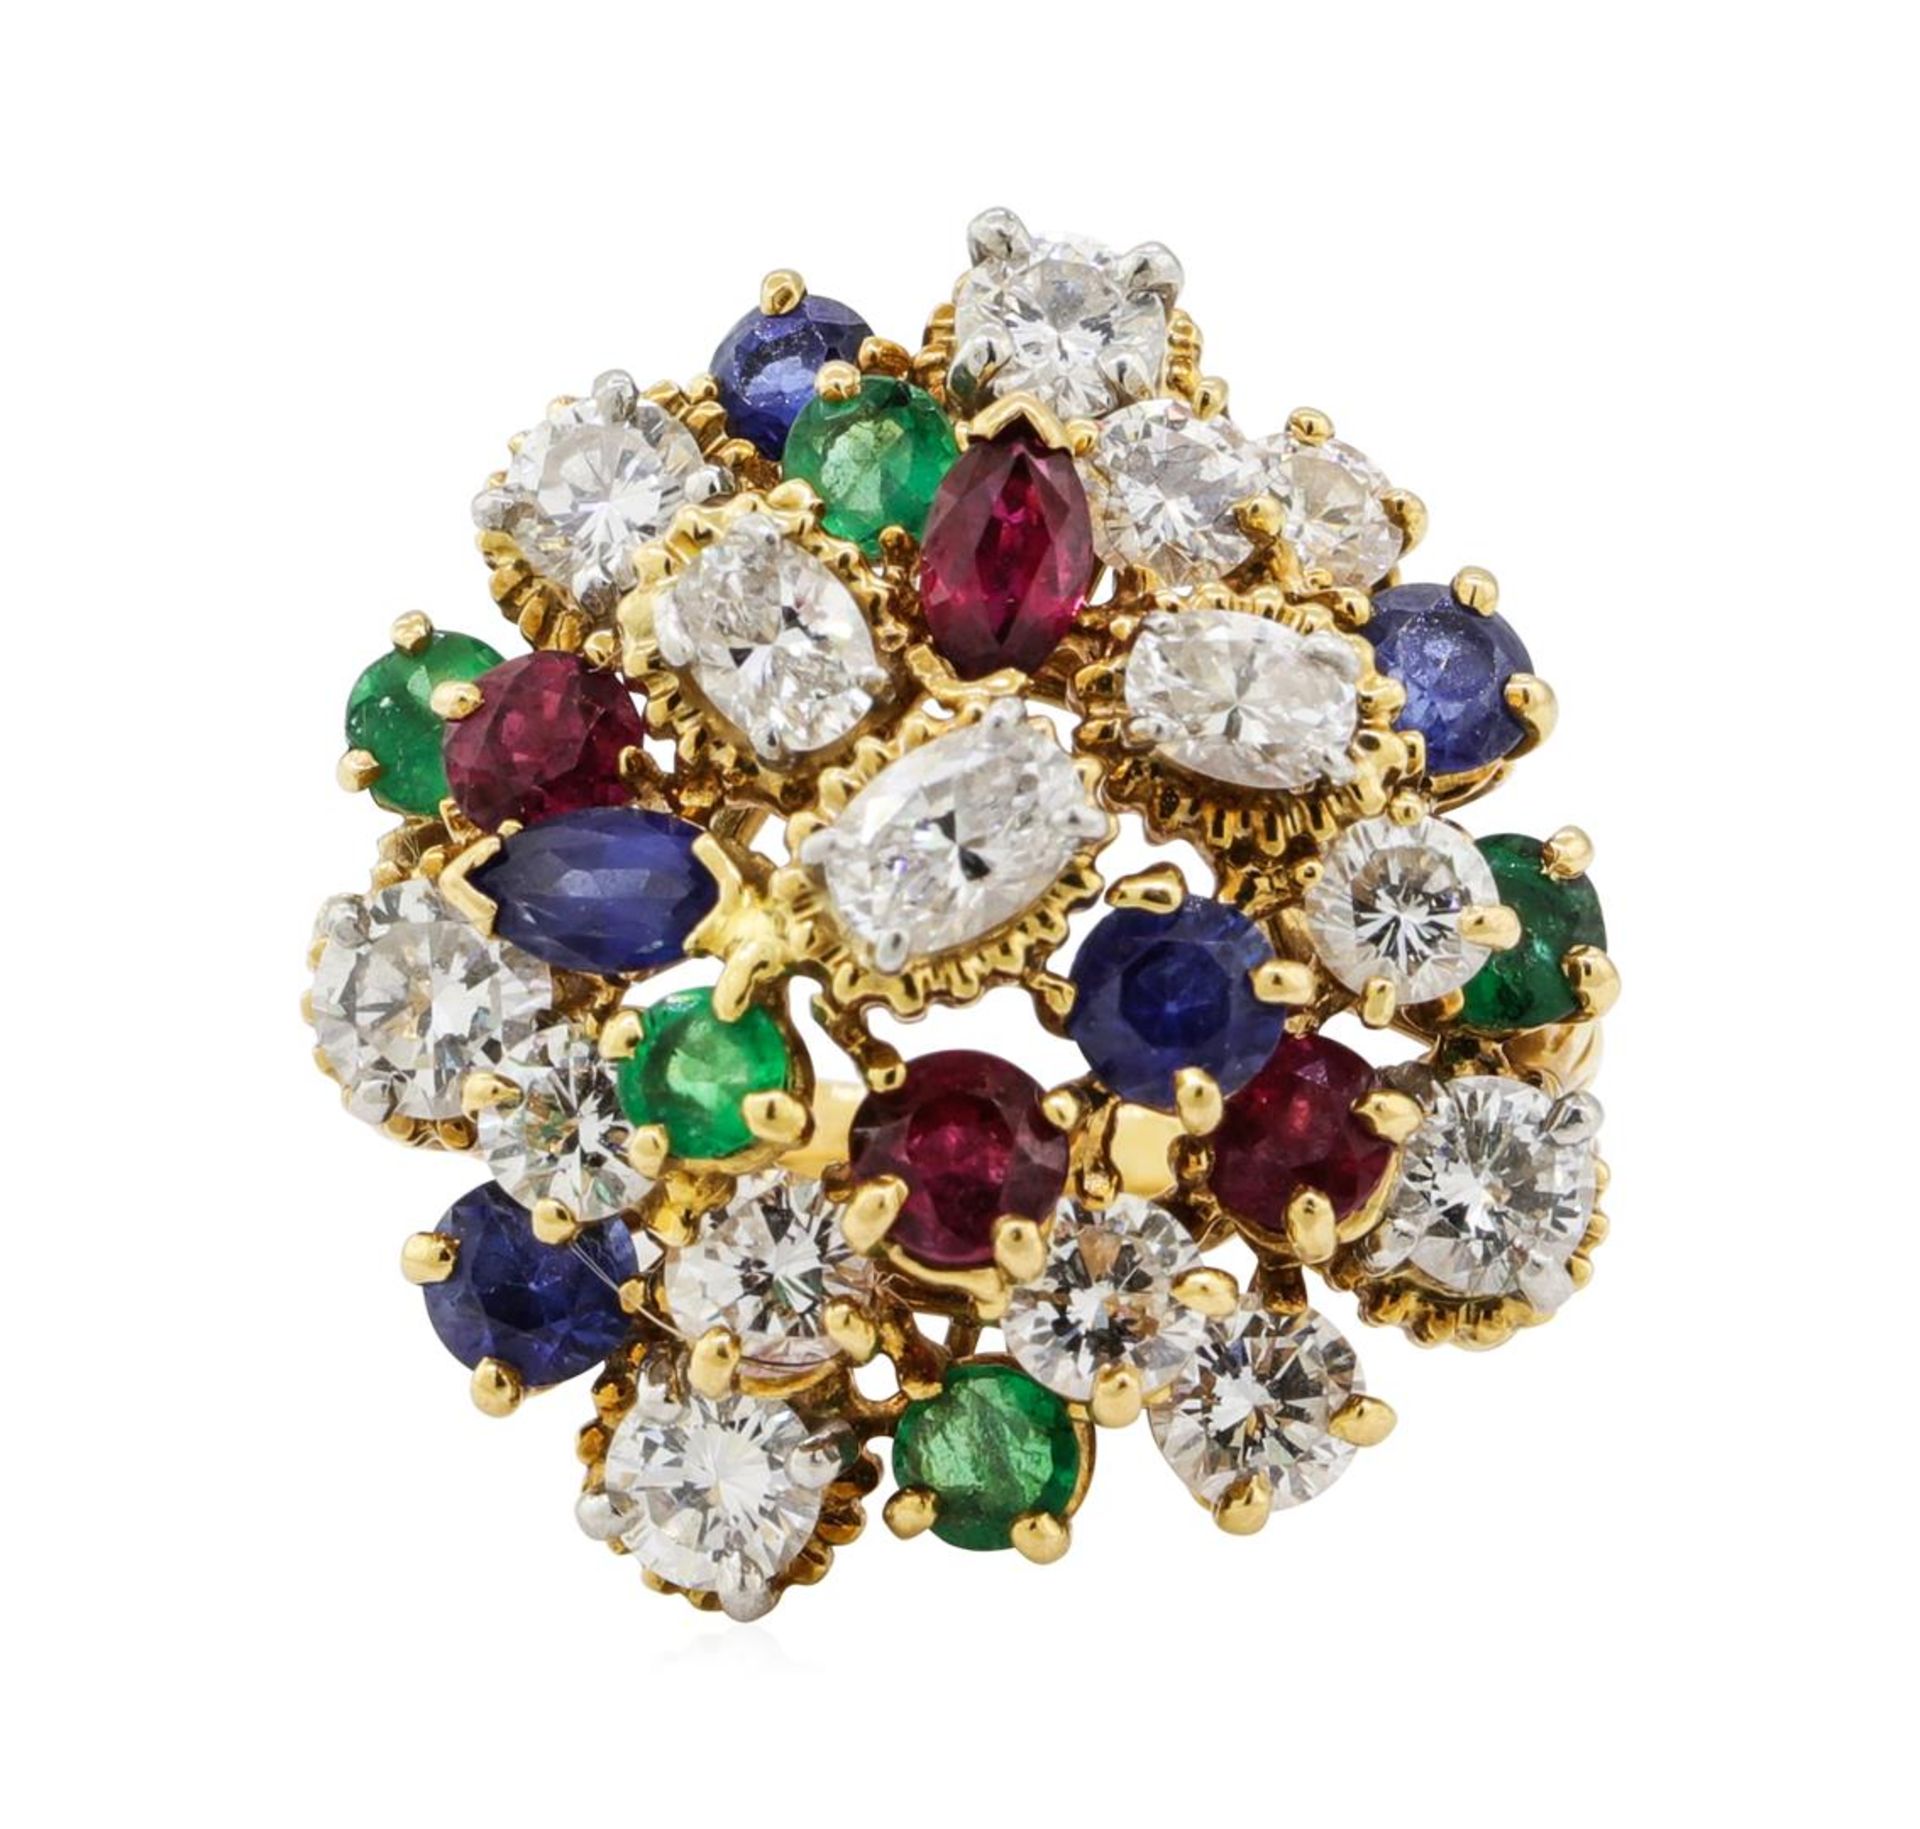 7.08 ctw Ruby, Emerald, Sapphire, and Diamond Ring - 18KT Yellow Gold and Platin - Image 2 of 6